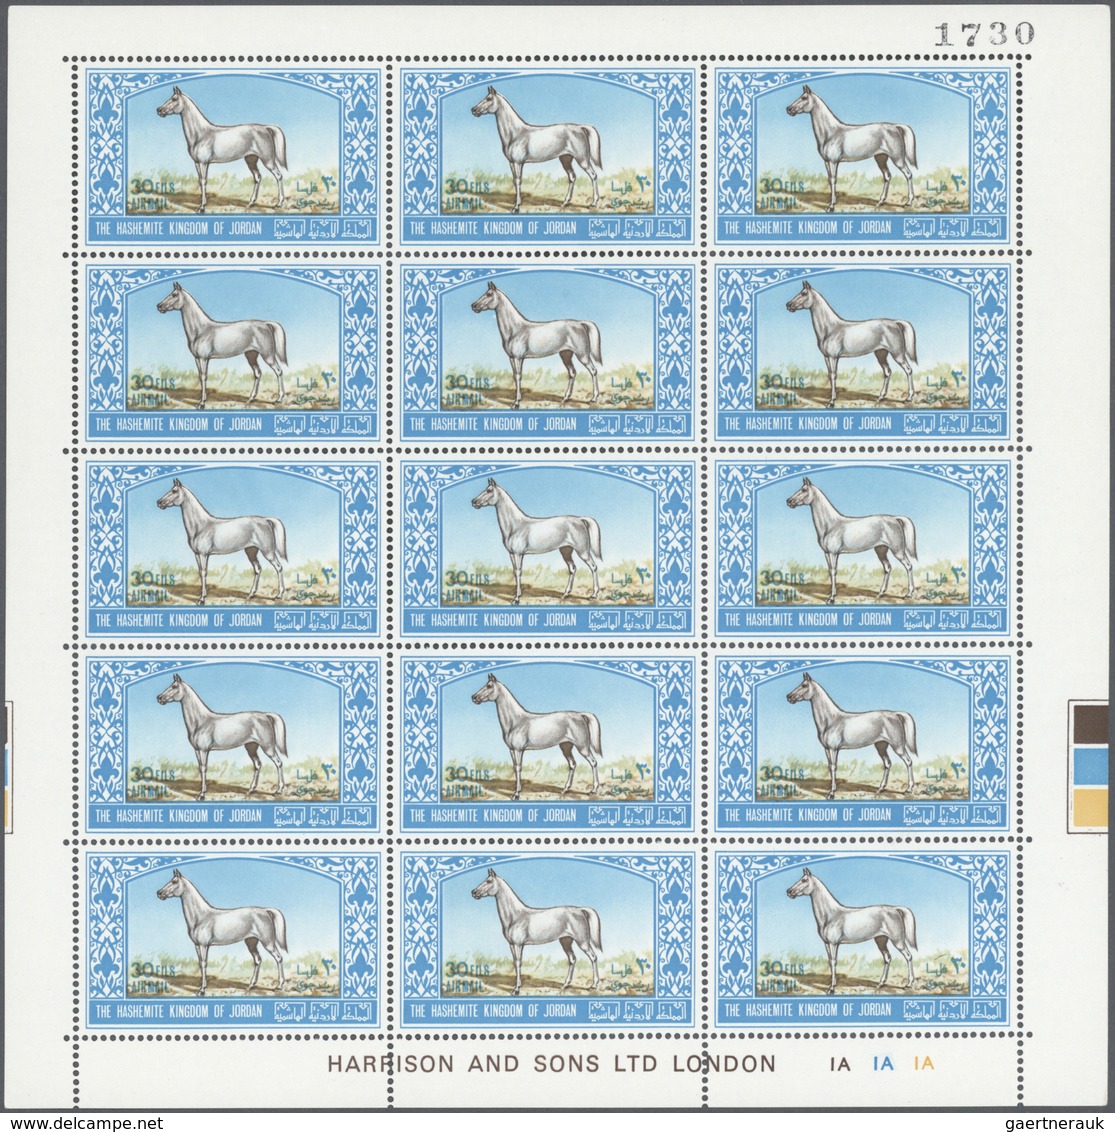 ** Jordanien: 1967, Animals, perforated, complete set of six values as sheets of 15 stamps with printer